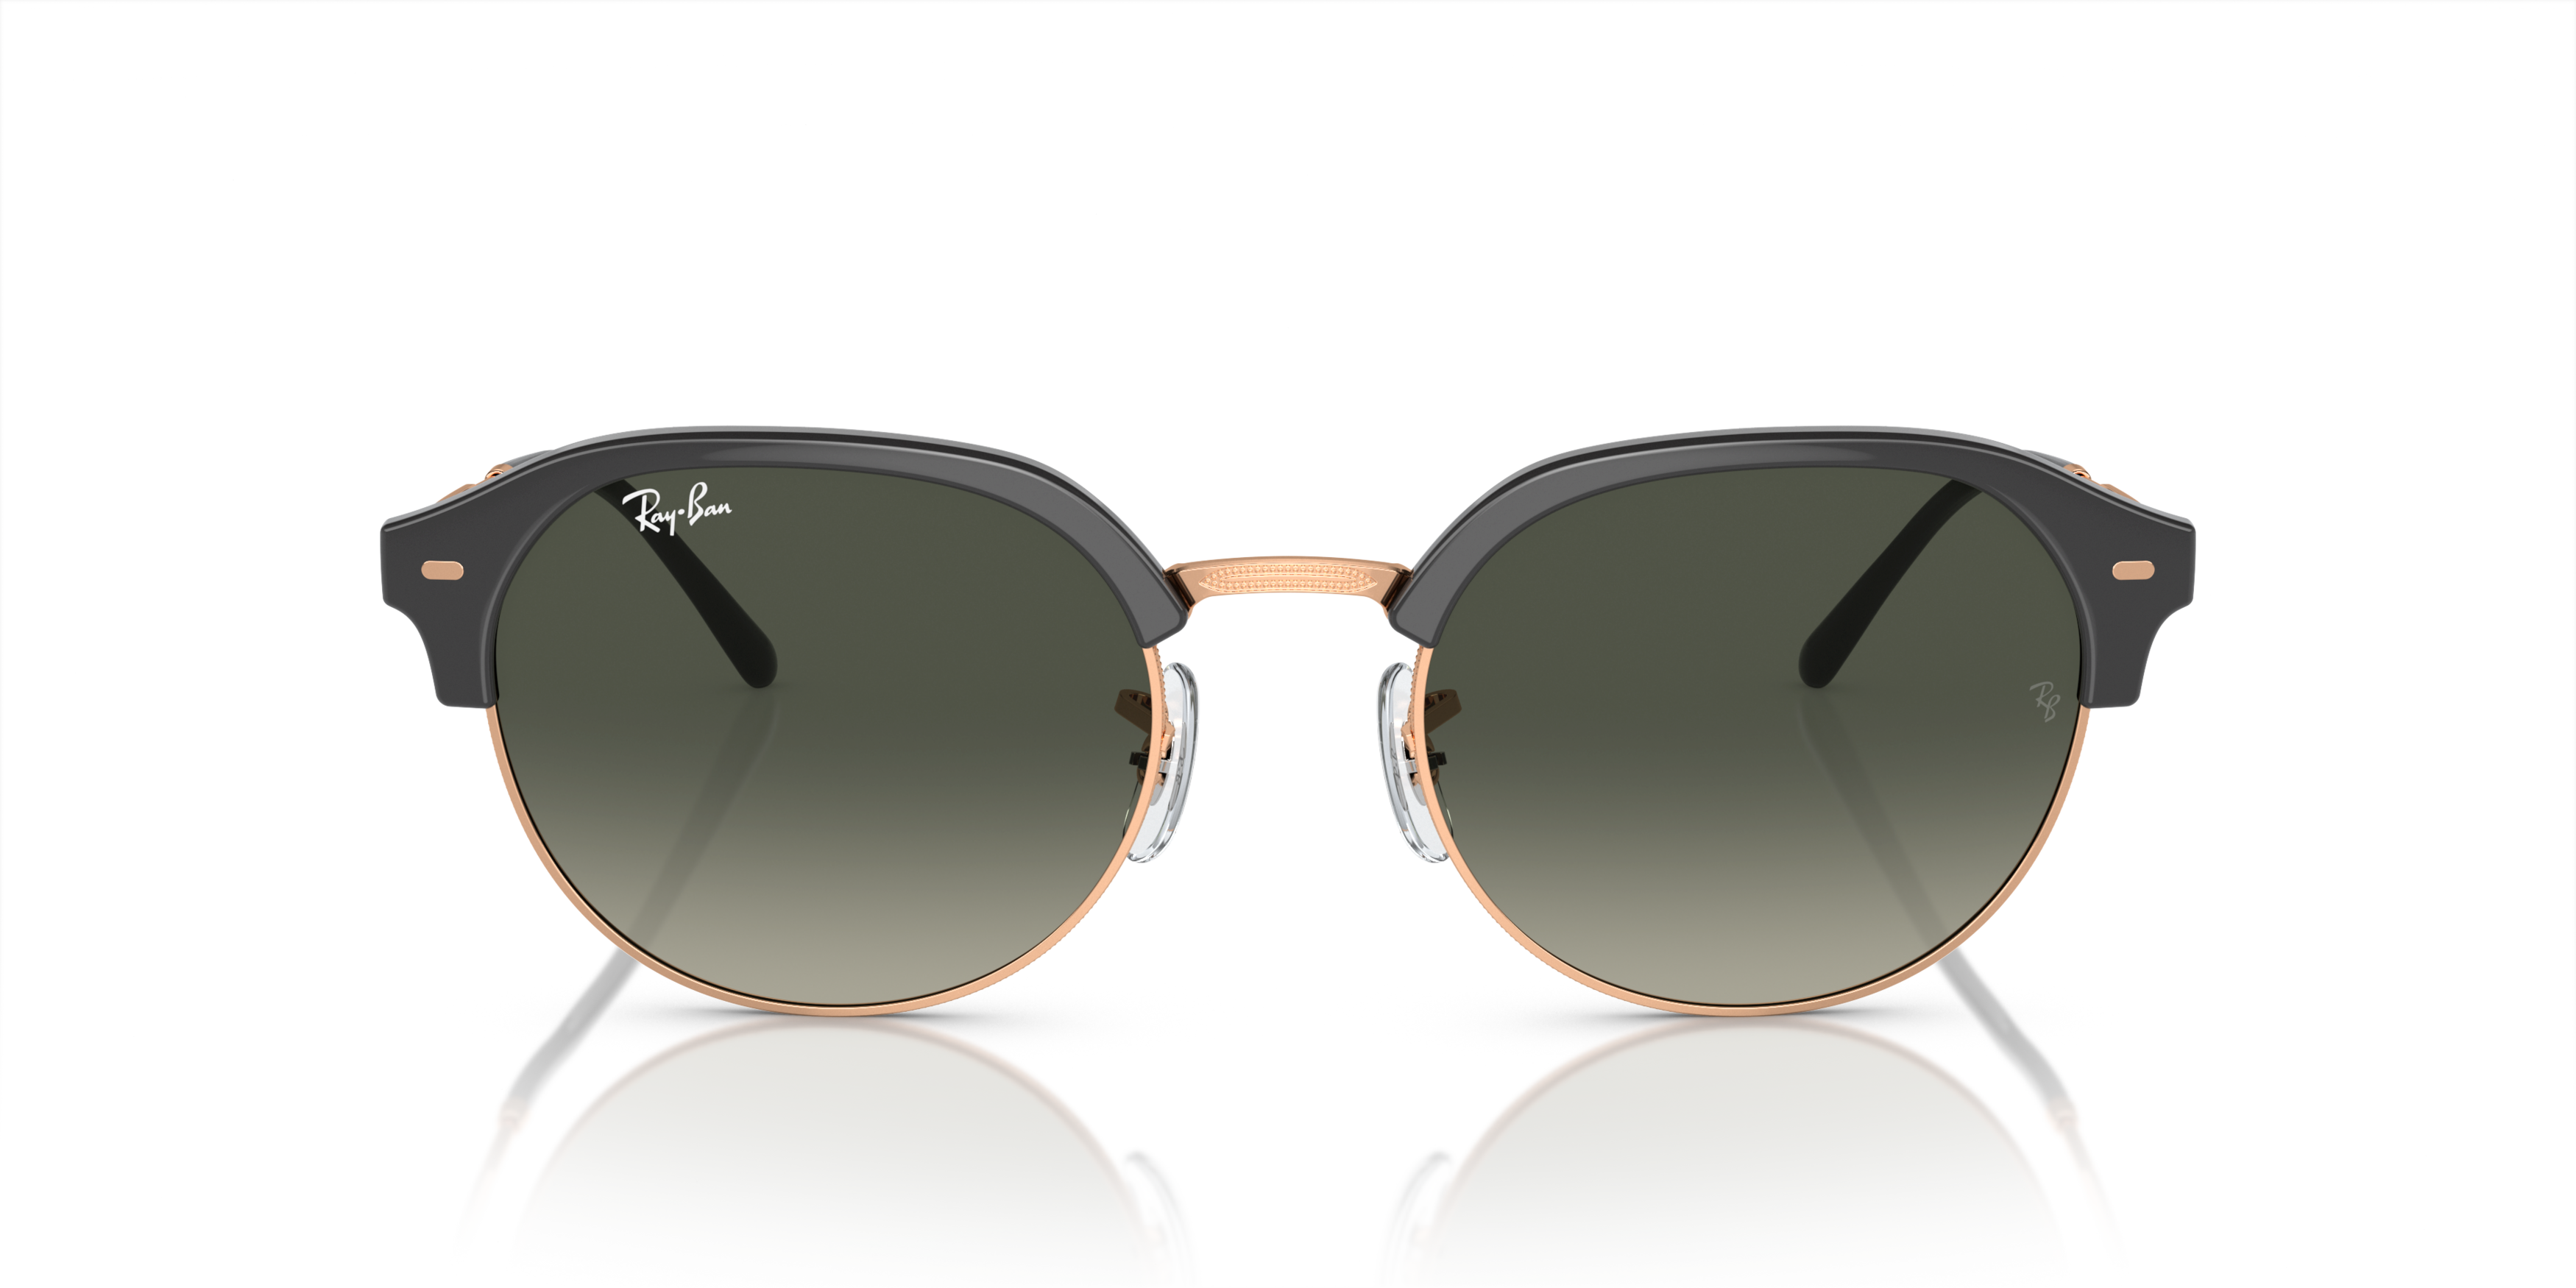 [products.image.front] Ray-Ban RB4429 672071